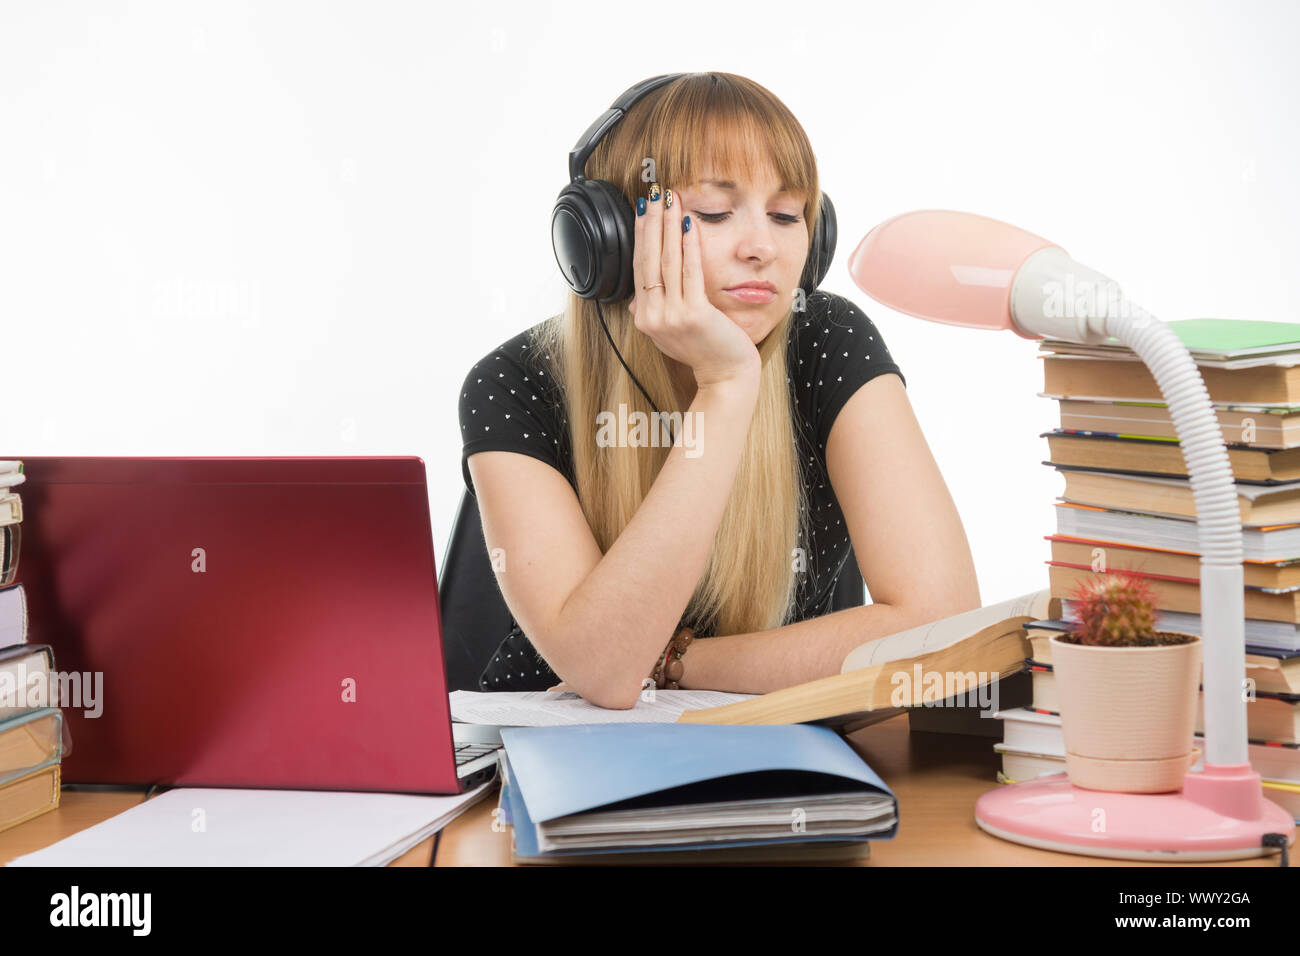 Student falling asleep reading a reference book Stock Photo